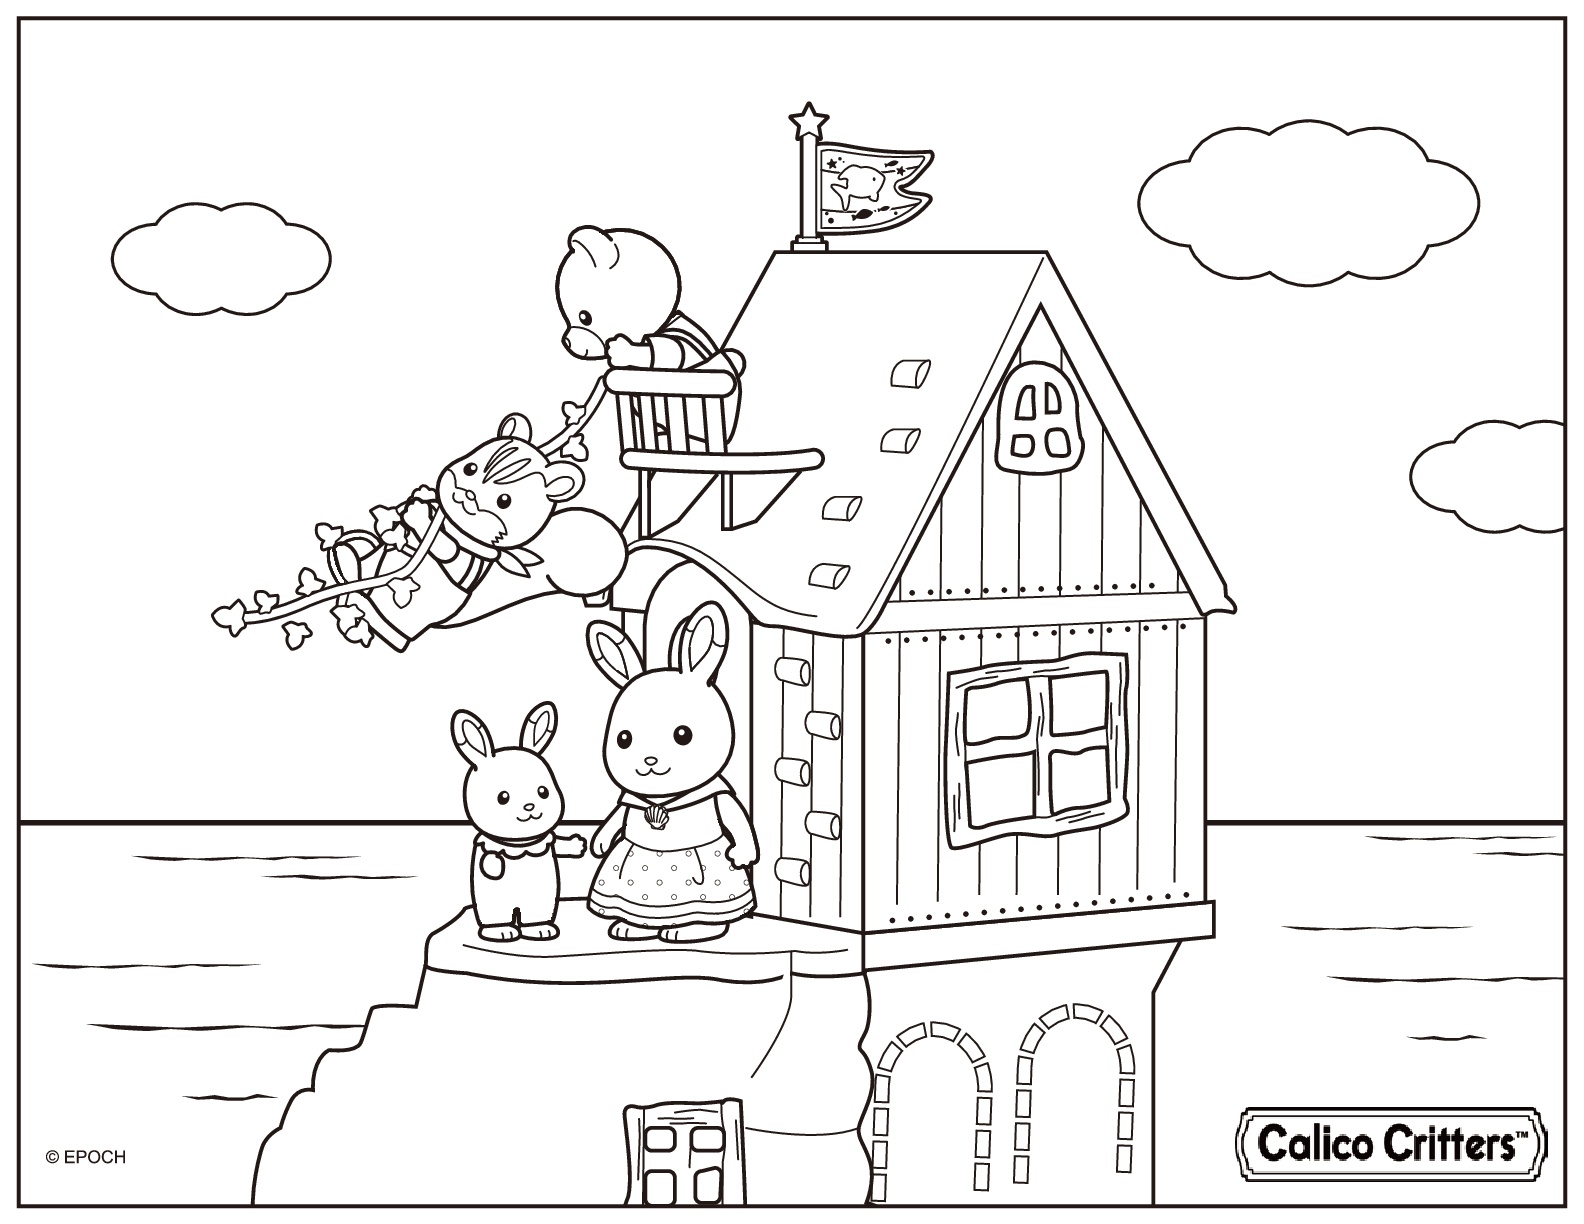 Calico Critters House Beach Coloring Pages - Coloring Cool